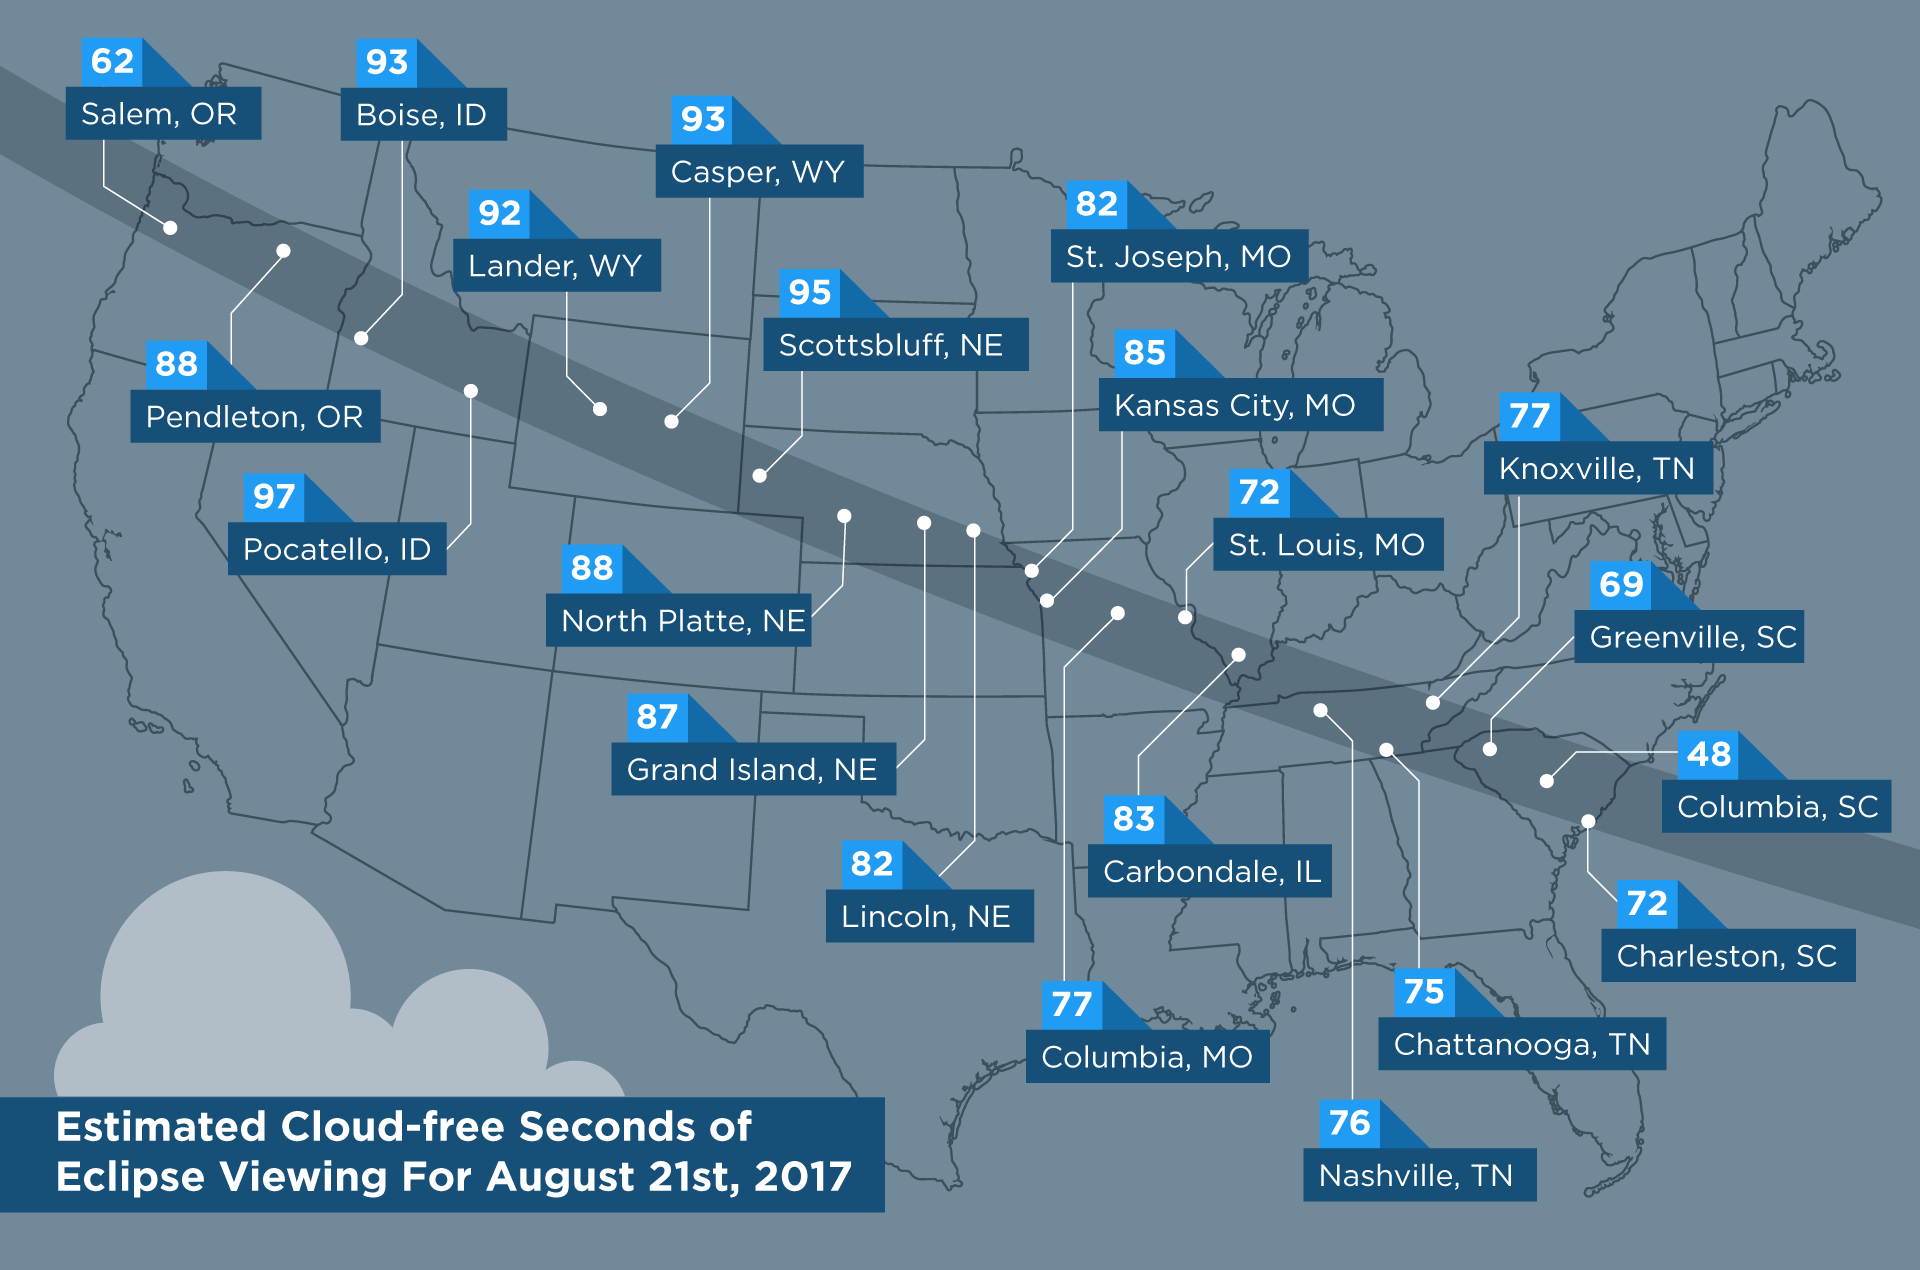 The Best Place On The Planet To View The Total Solar Eclipse This Summer, According To Science